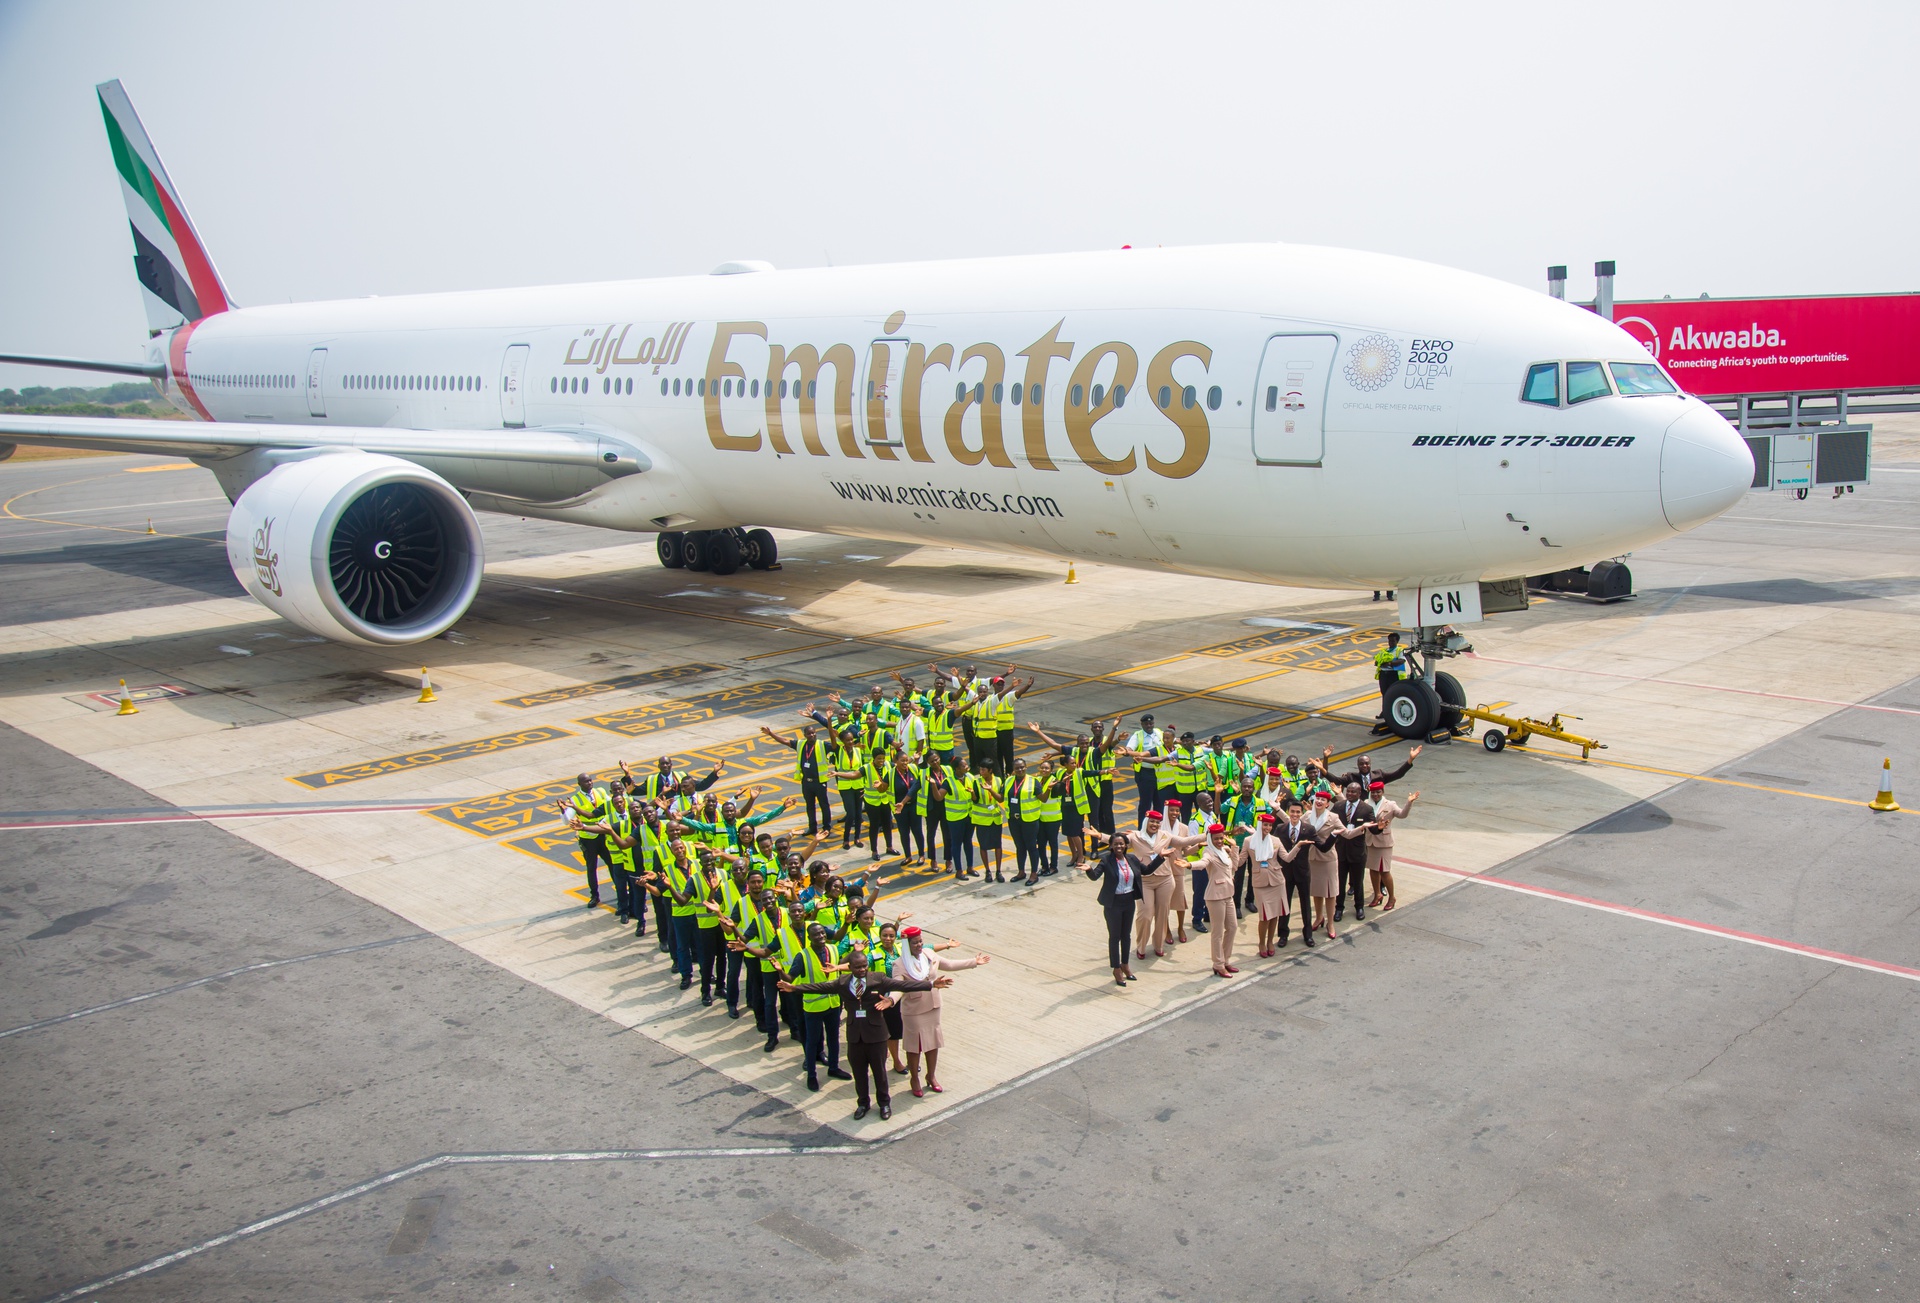 Emirates Celebrates 15 years of Connecting Ghana to the World